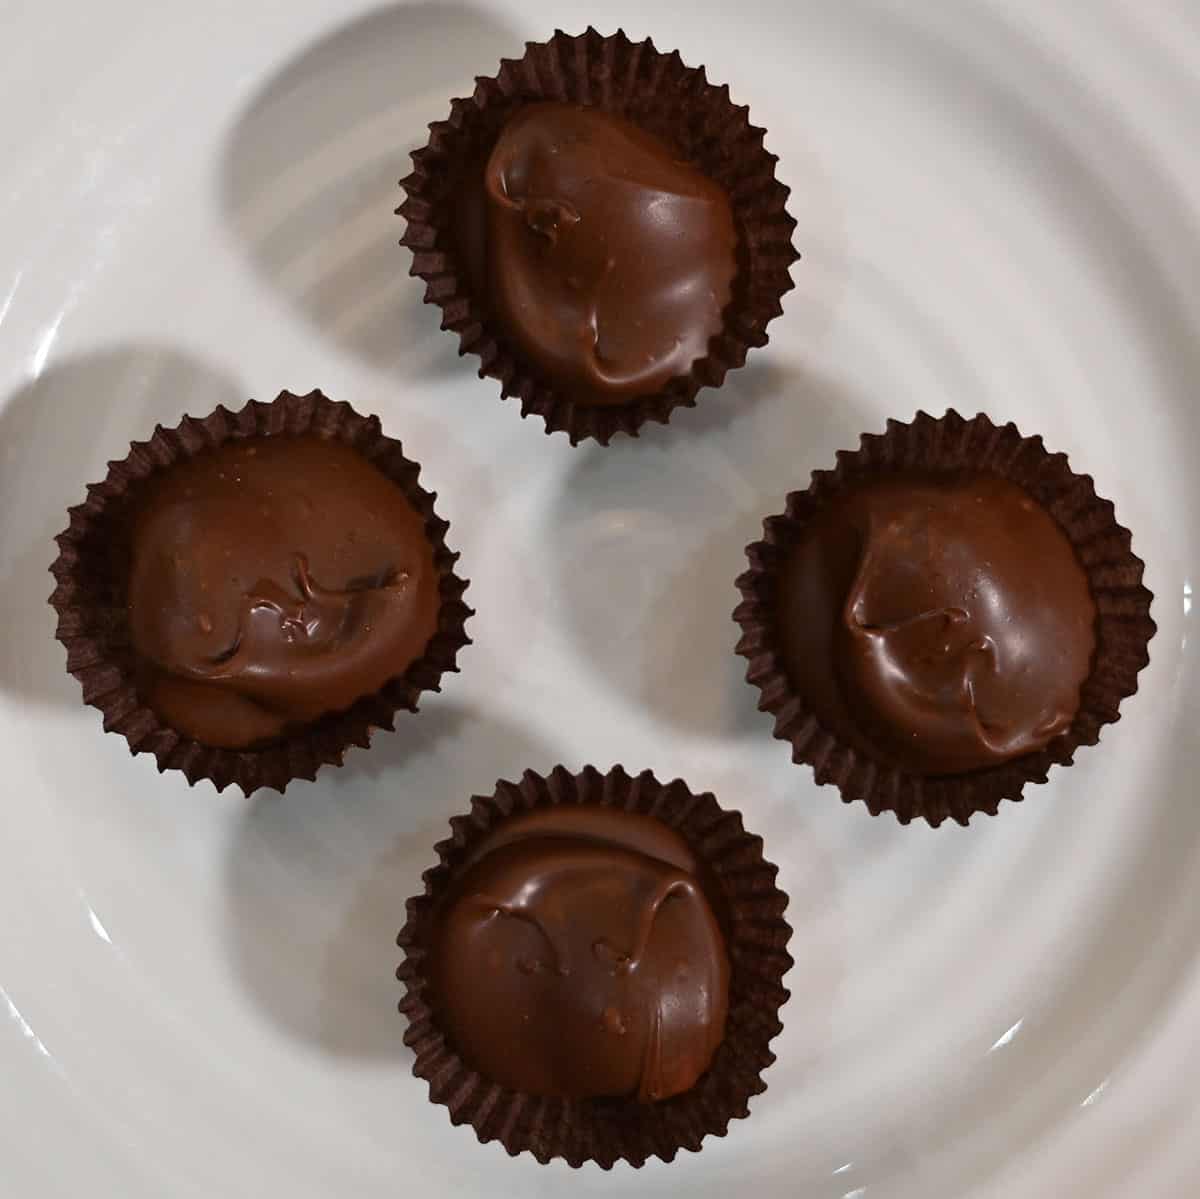 Closeup image of four chocolate covered macadamia nut chocolates in their wrapper on a plate.